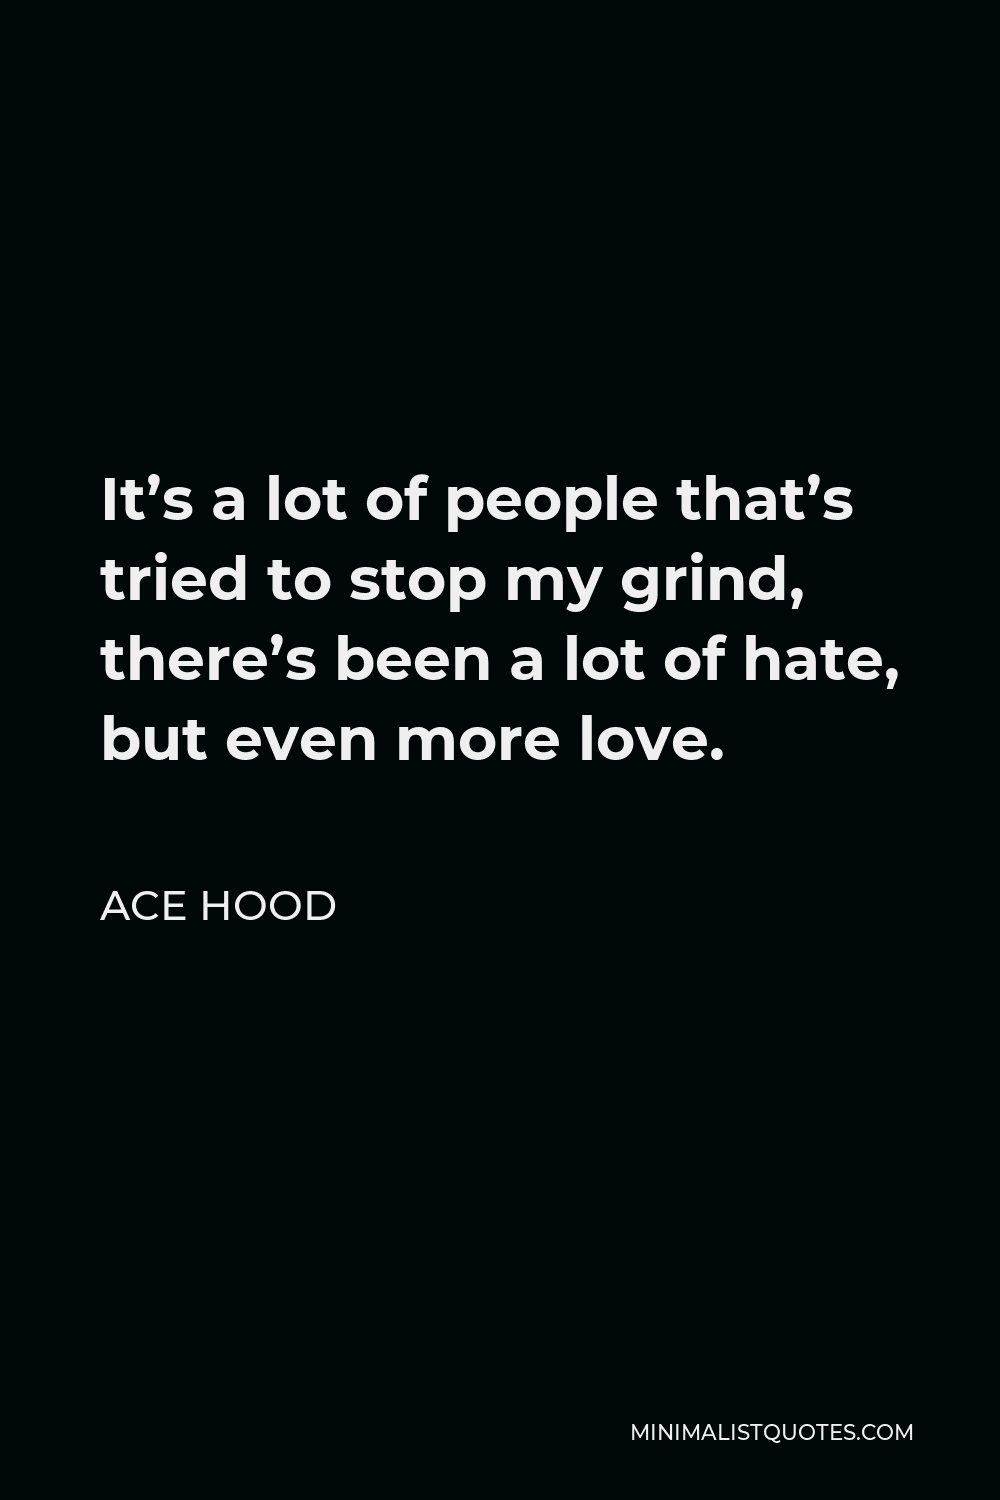 Ace Hood Quote - It’s a lot of people that’s tried to stop my grind, there’s been a lot of hate, but even more love.